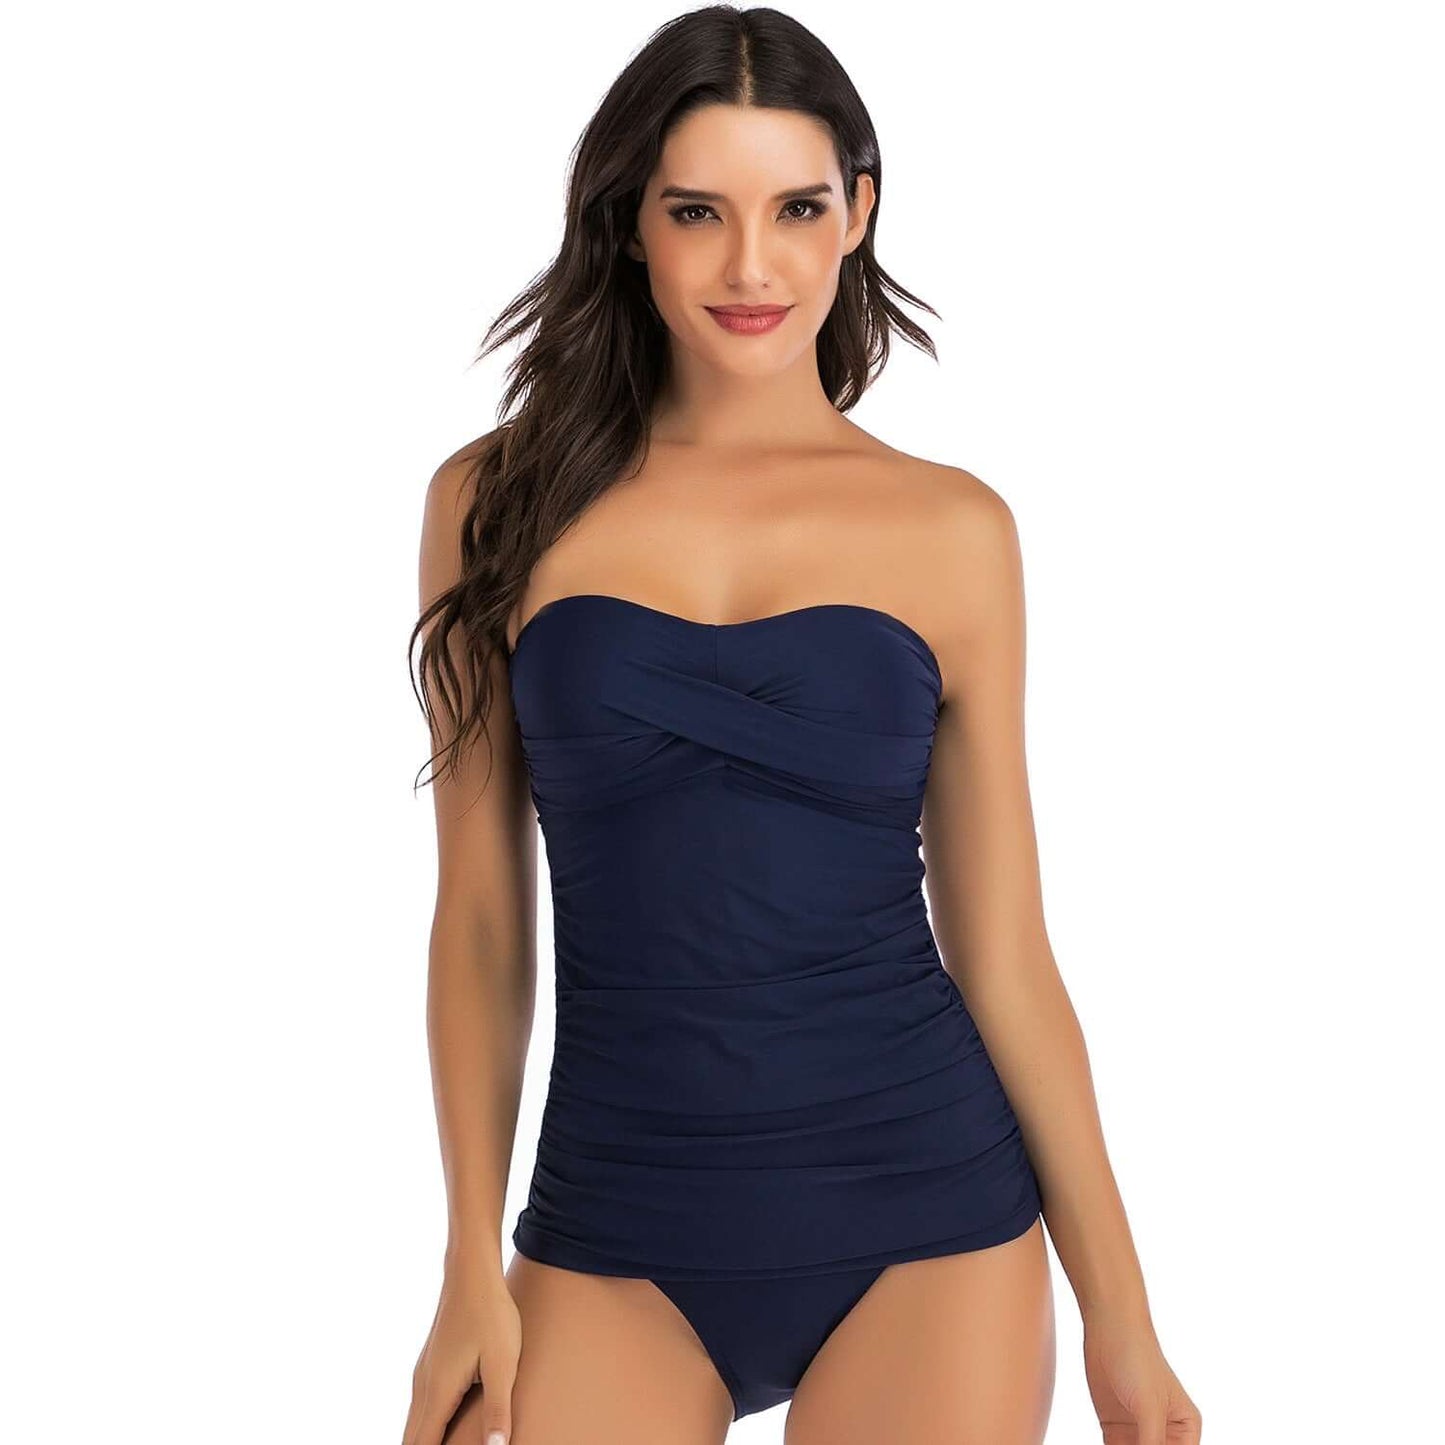 Covered belly split swimsuit ladies conservative